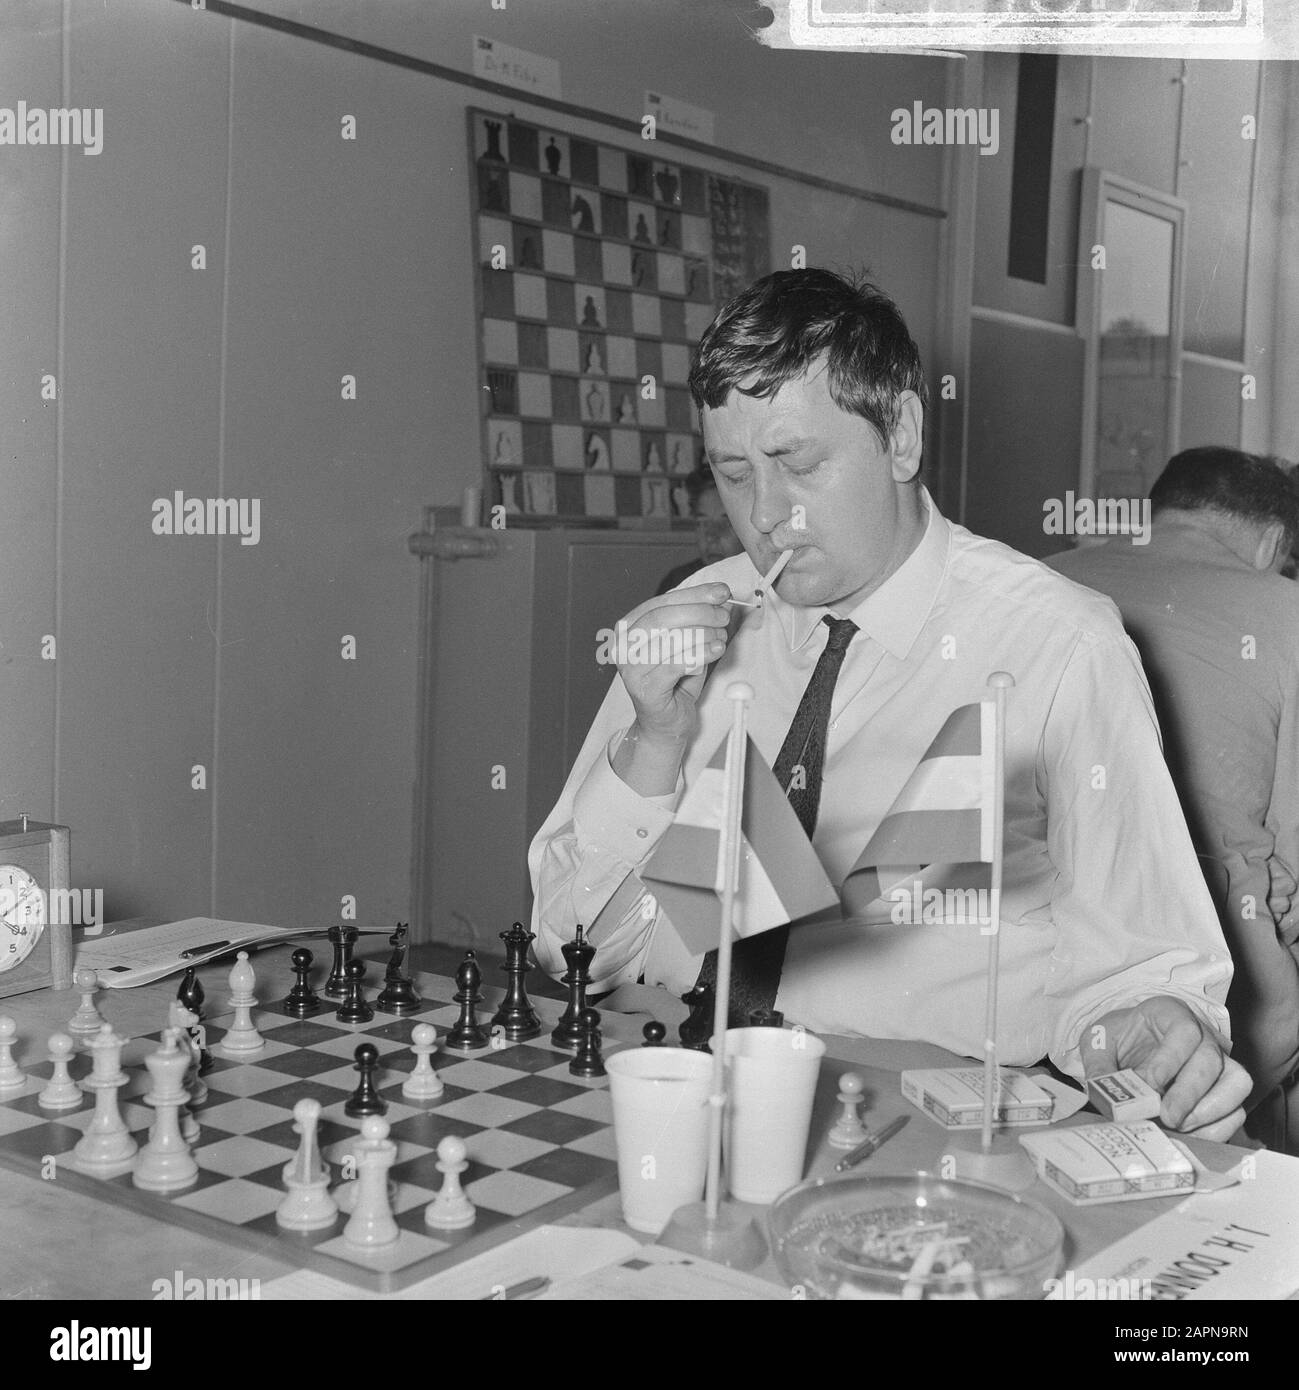 IBM Chess Tournament, Donner (lights up cigarette) Date: July 20, 1965  Keywords: chess, Tournaments Institution name: IBM Stock Photo - Alamy